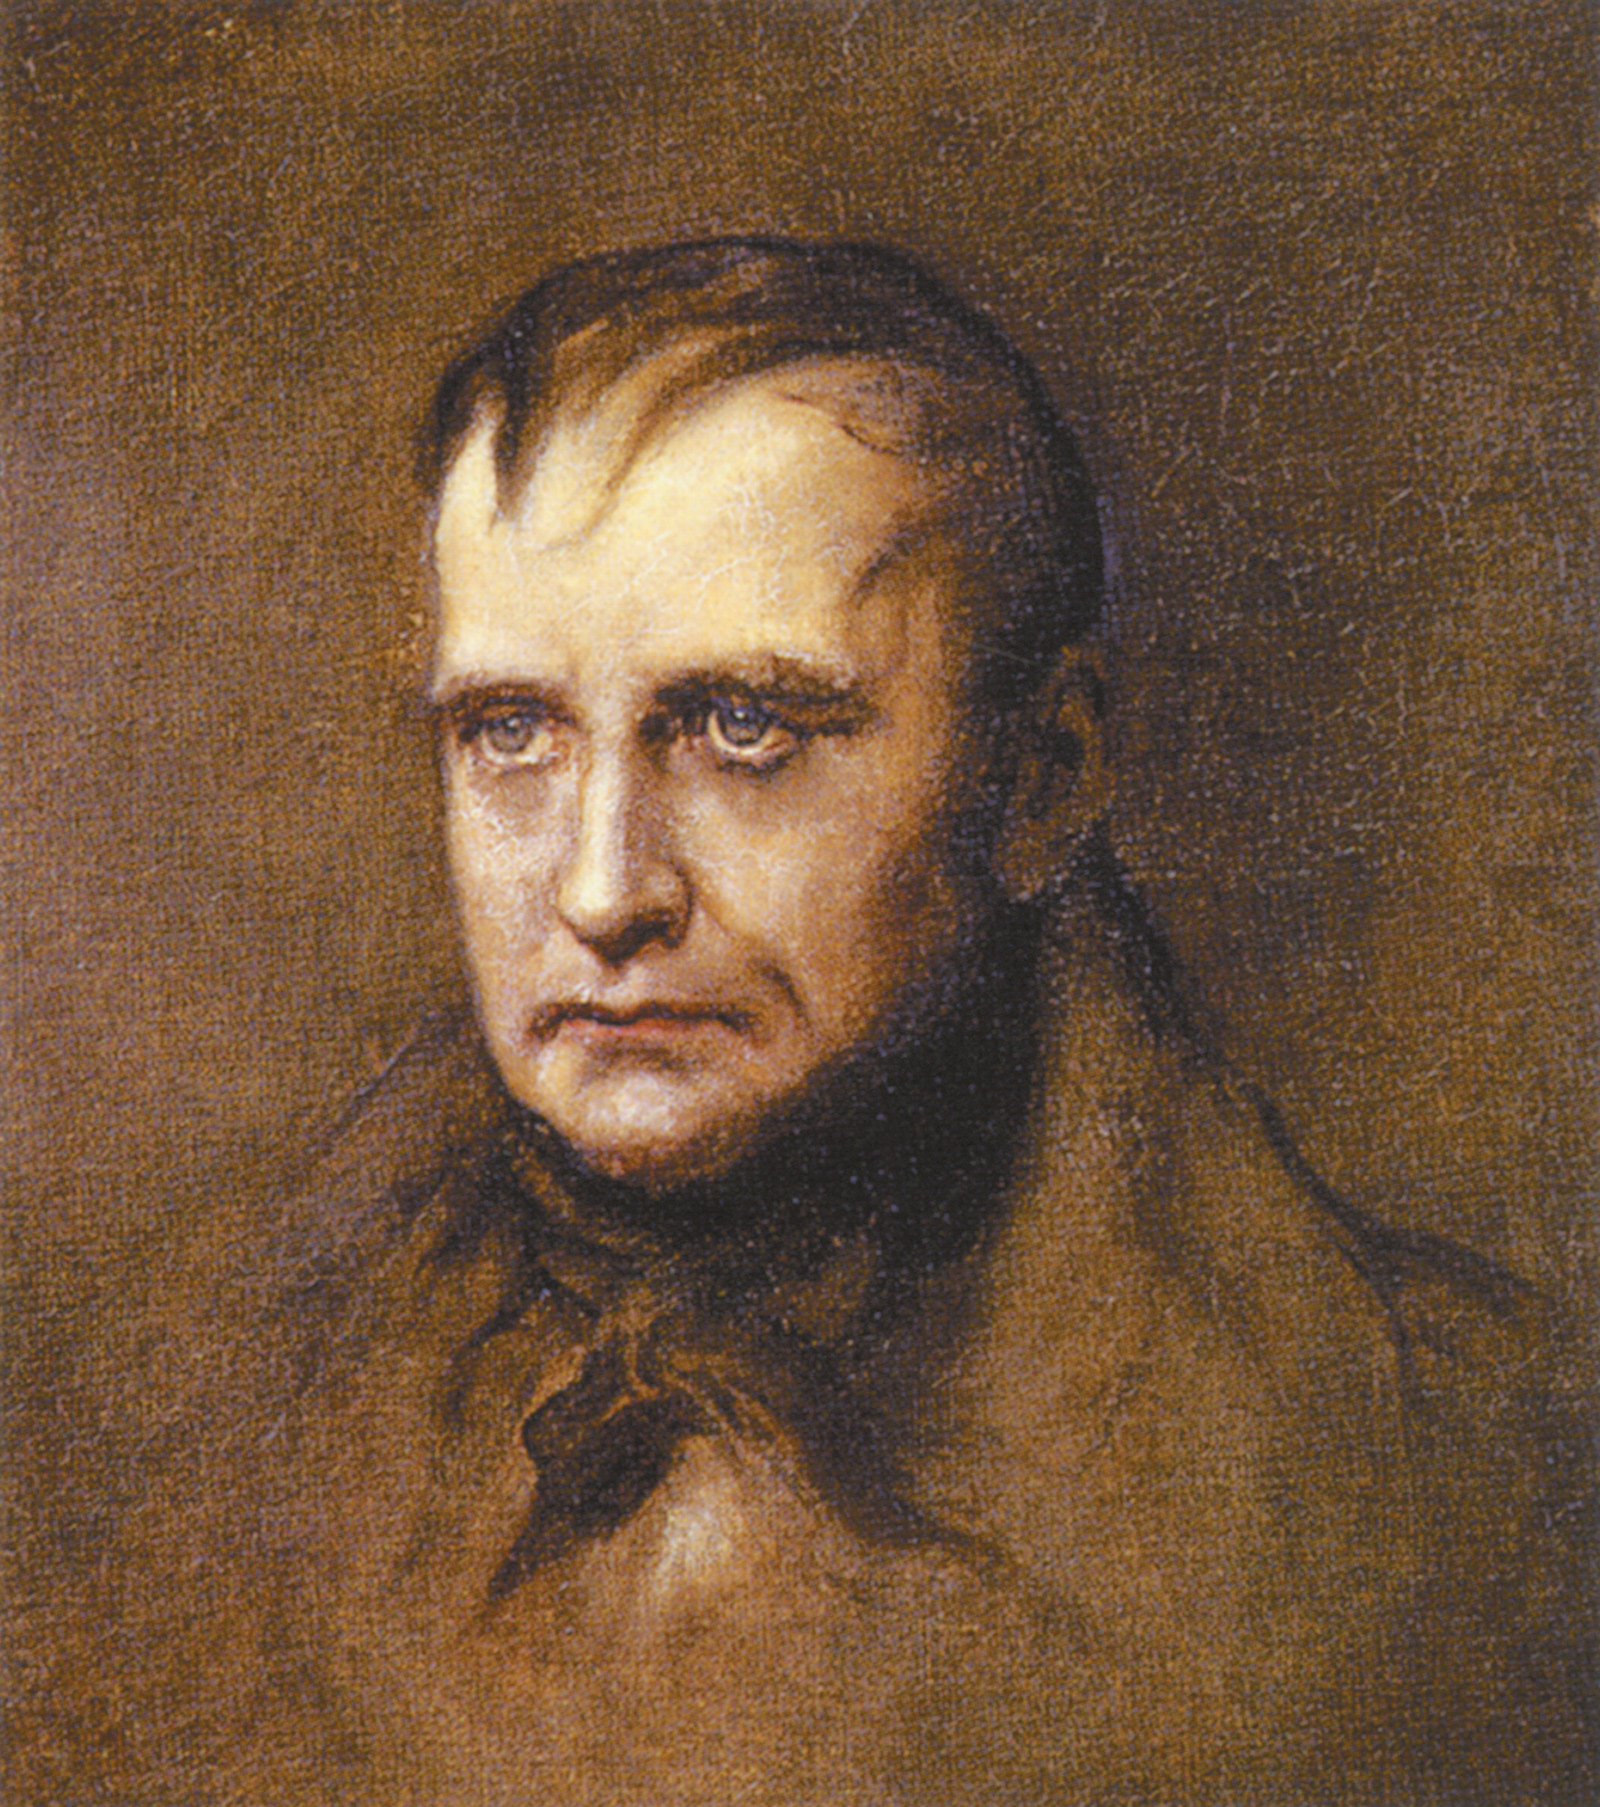 ‘St. Helena, the Last Stage’; portrait of Napoleon by James Sant, 1901